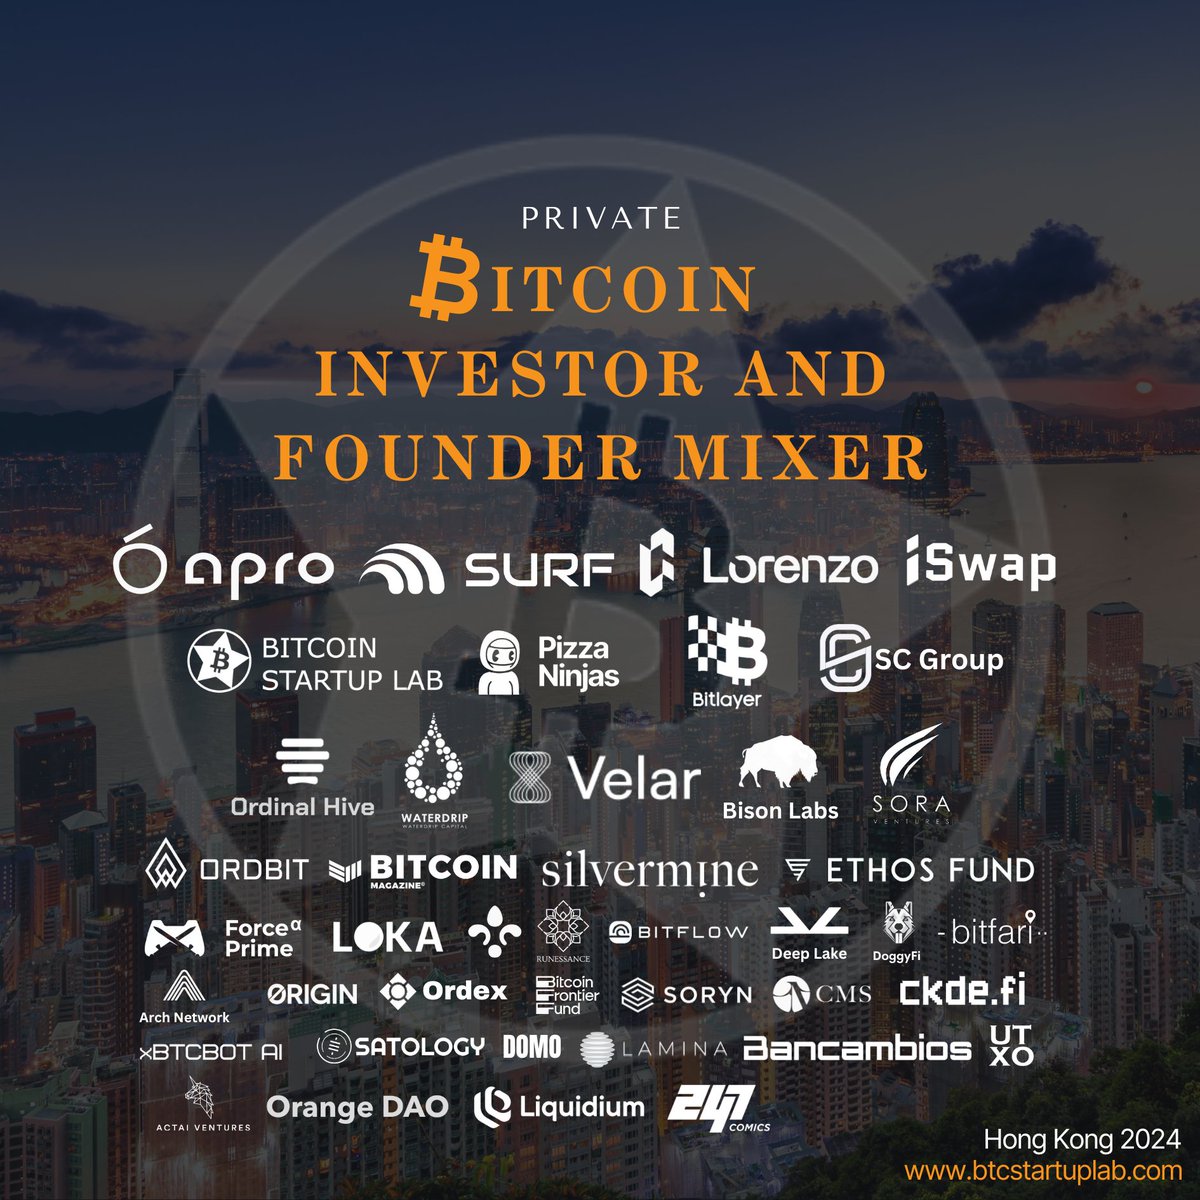 Only 10 days away... but who's counting? 😉 btcstartuplab.info/BitcoinAsia